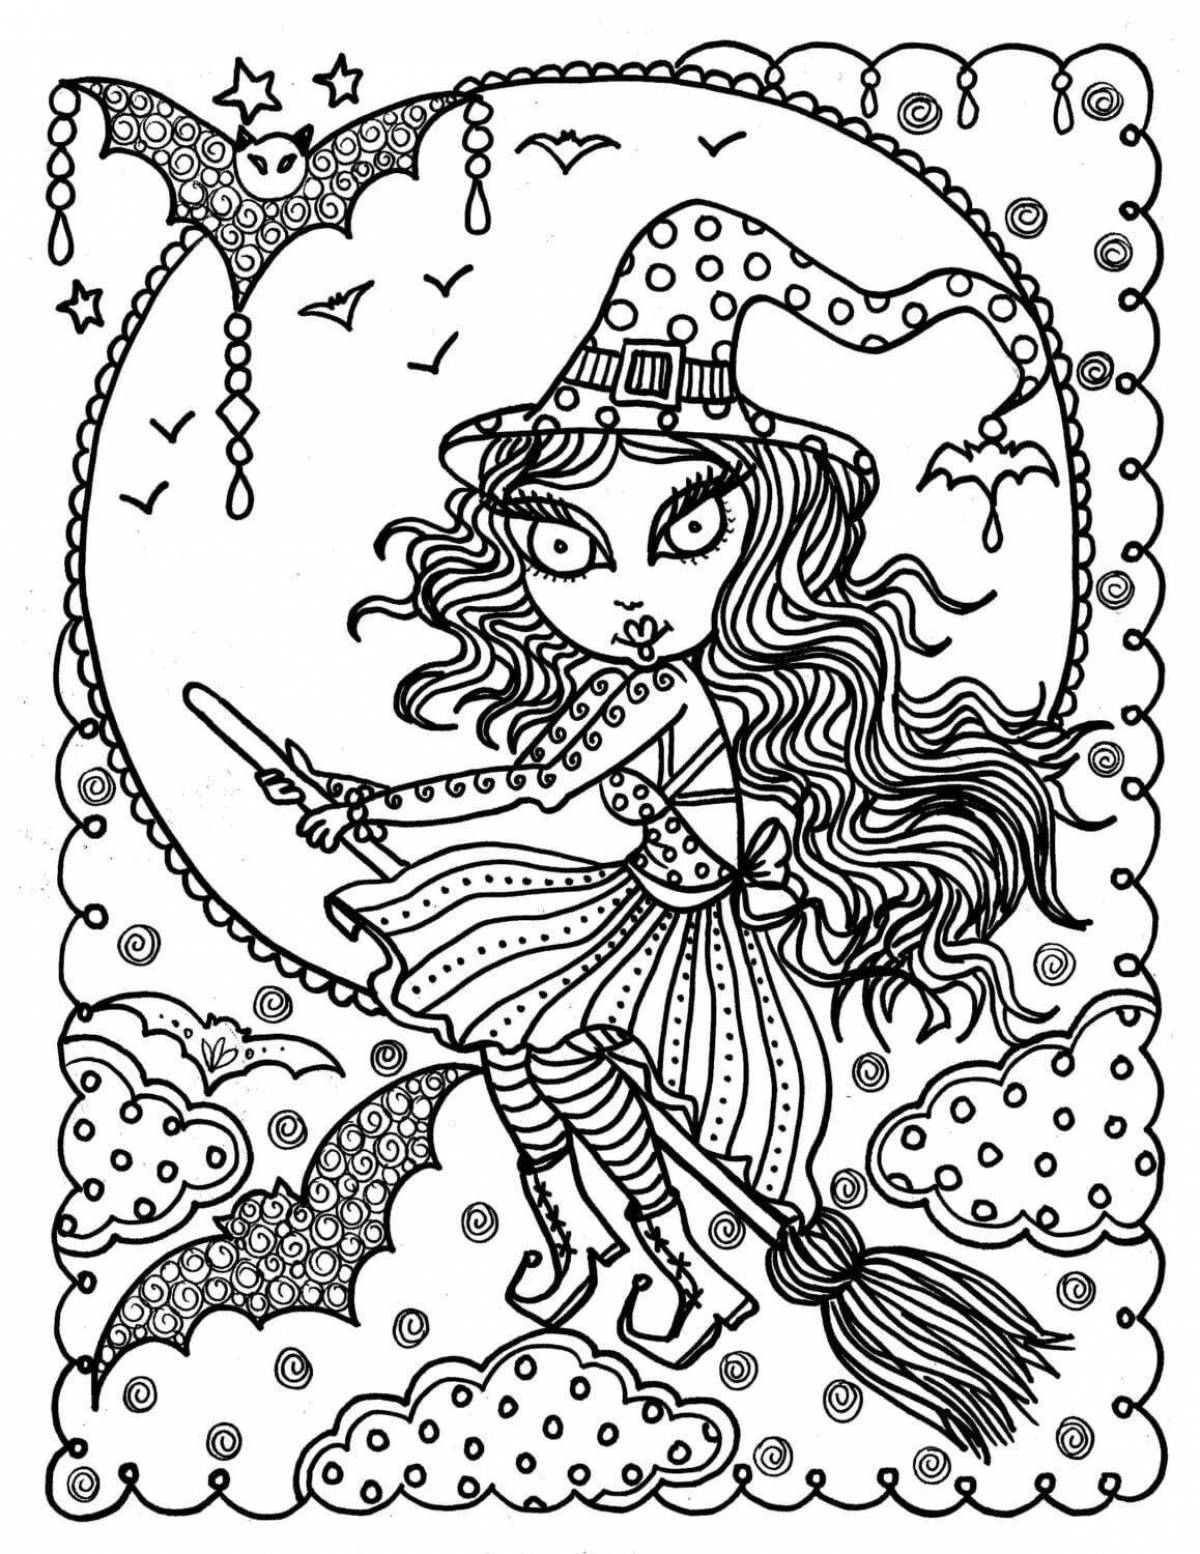 Witch's premonition coloring page